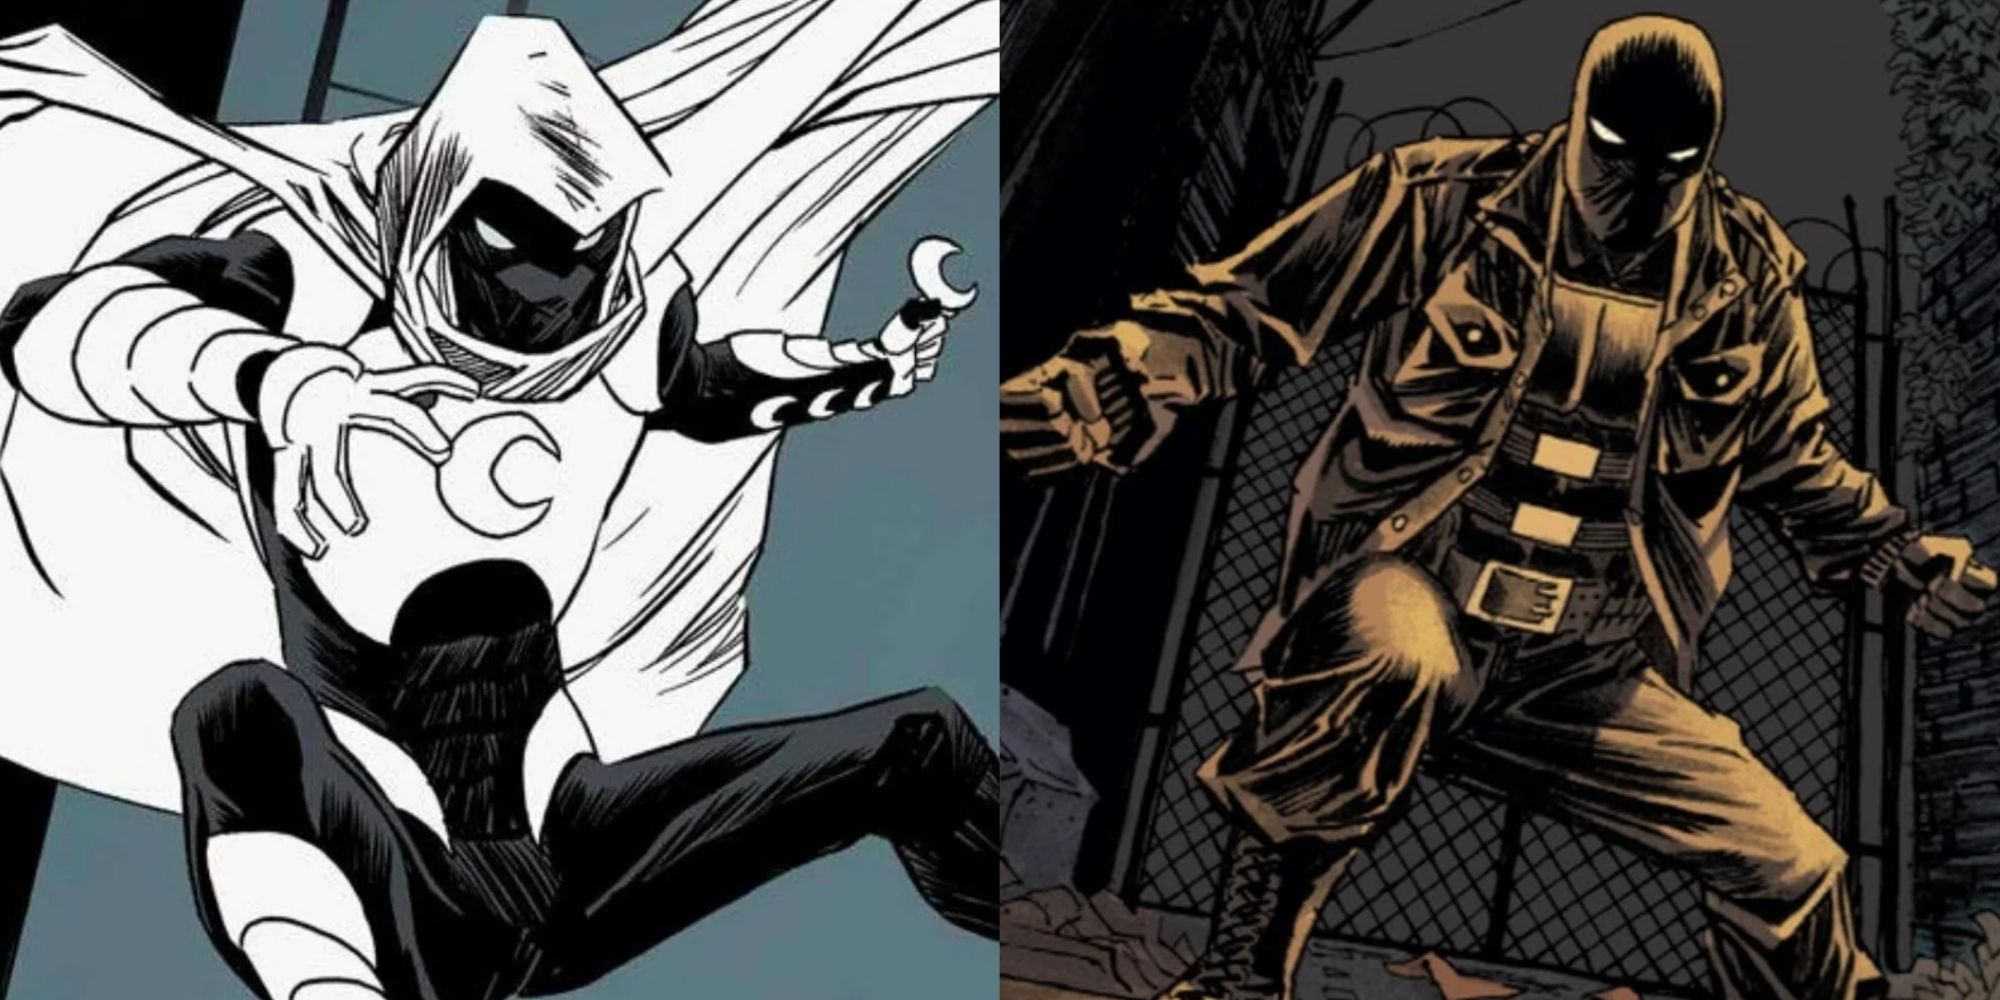 Moon Knight and Black Spectre in Marvel comics